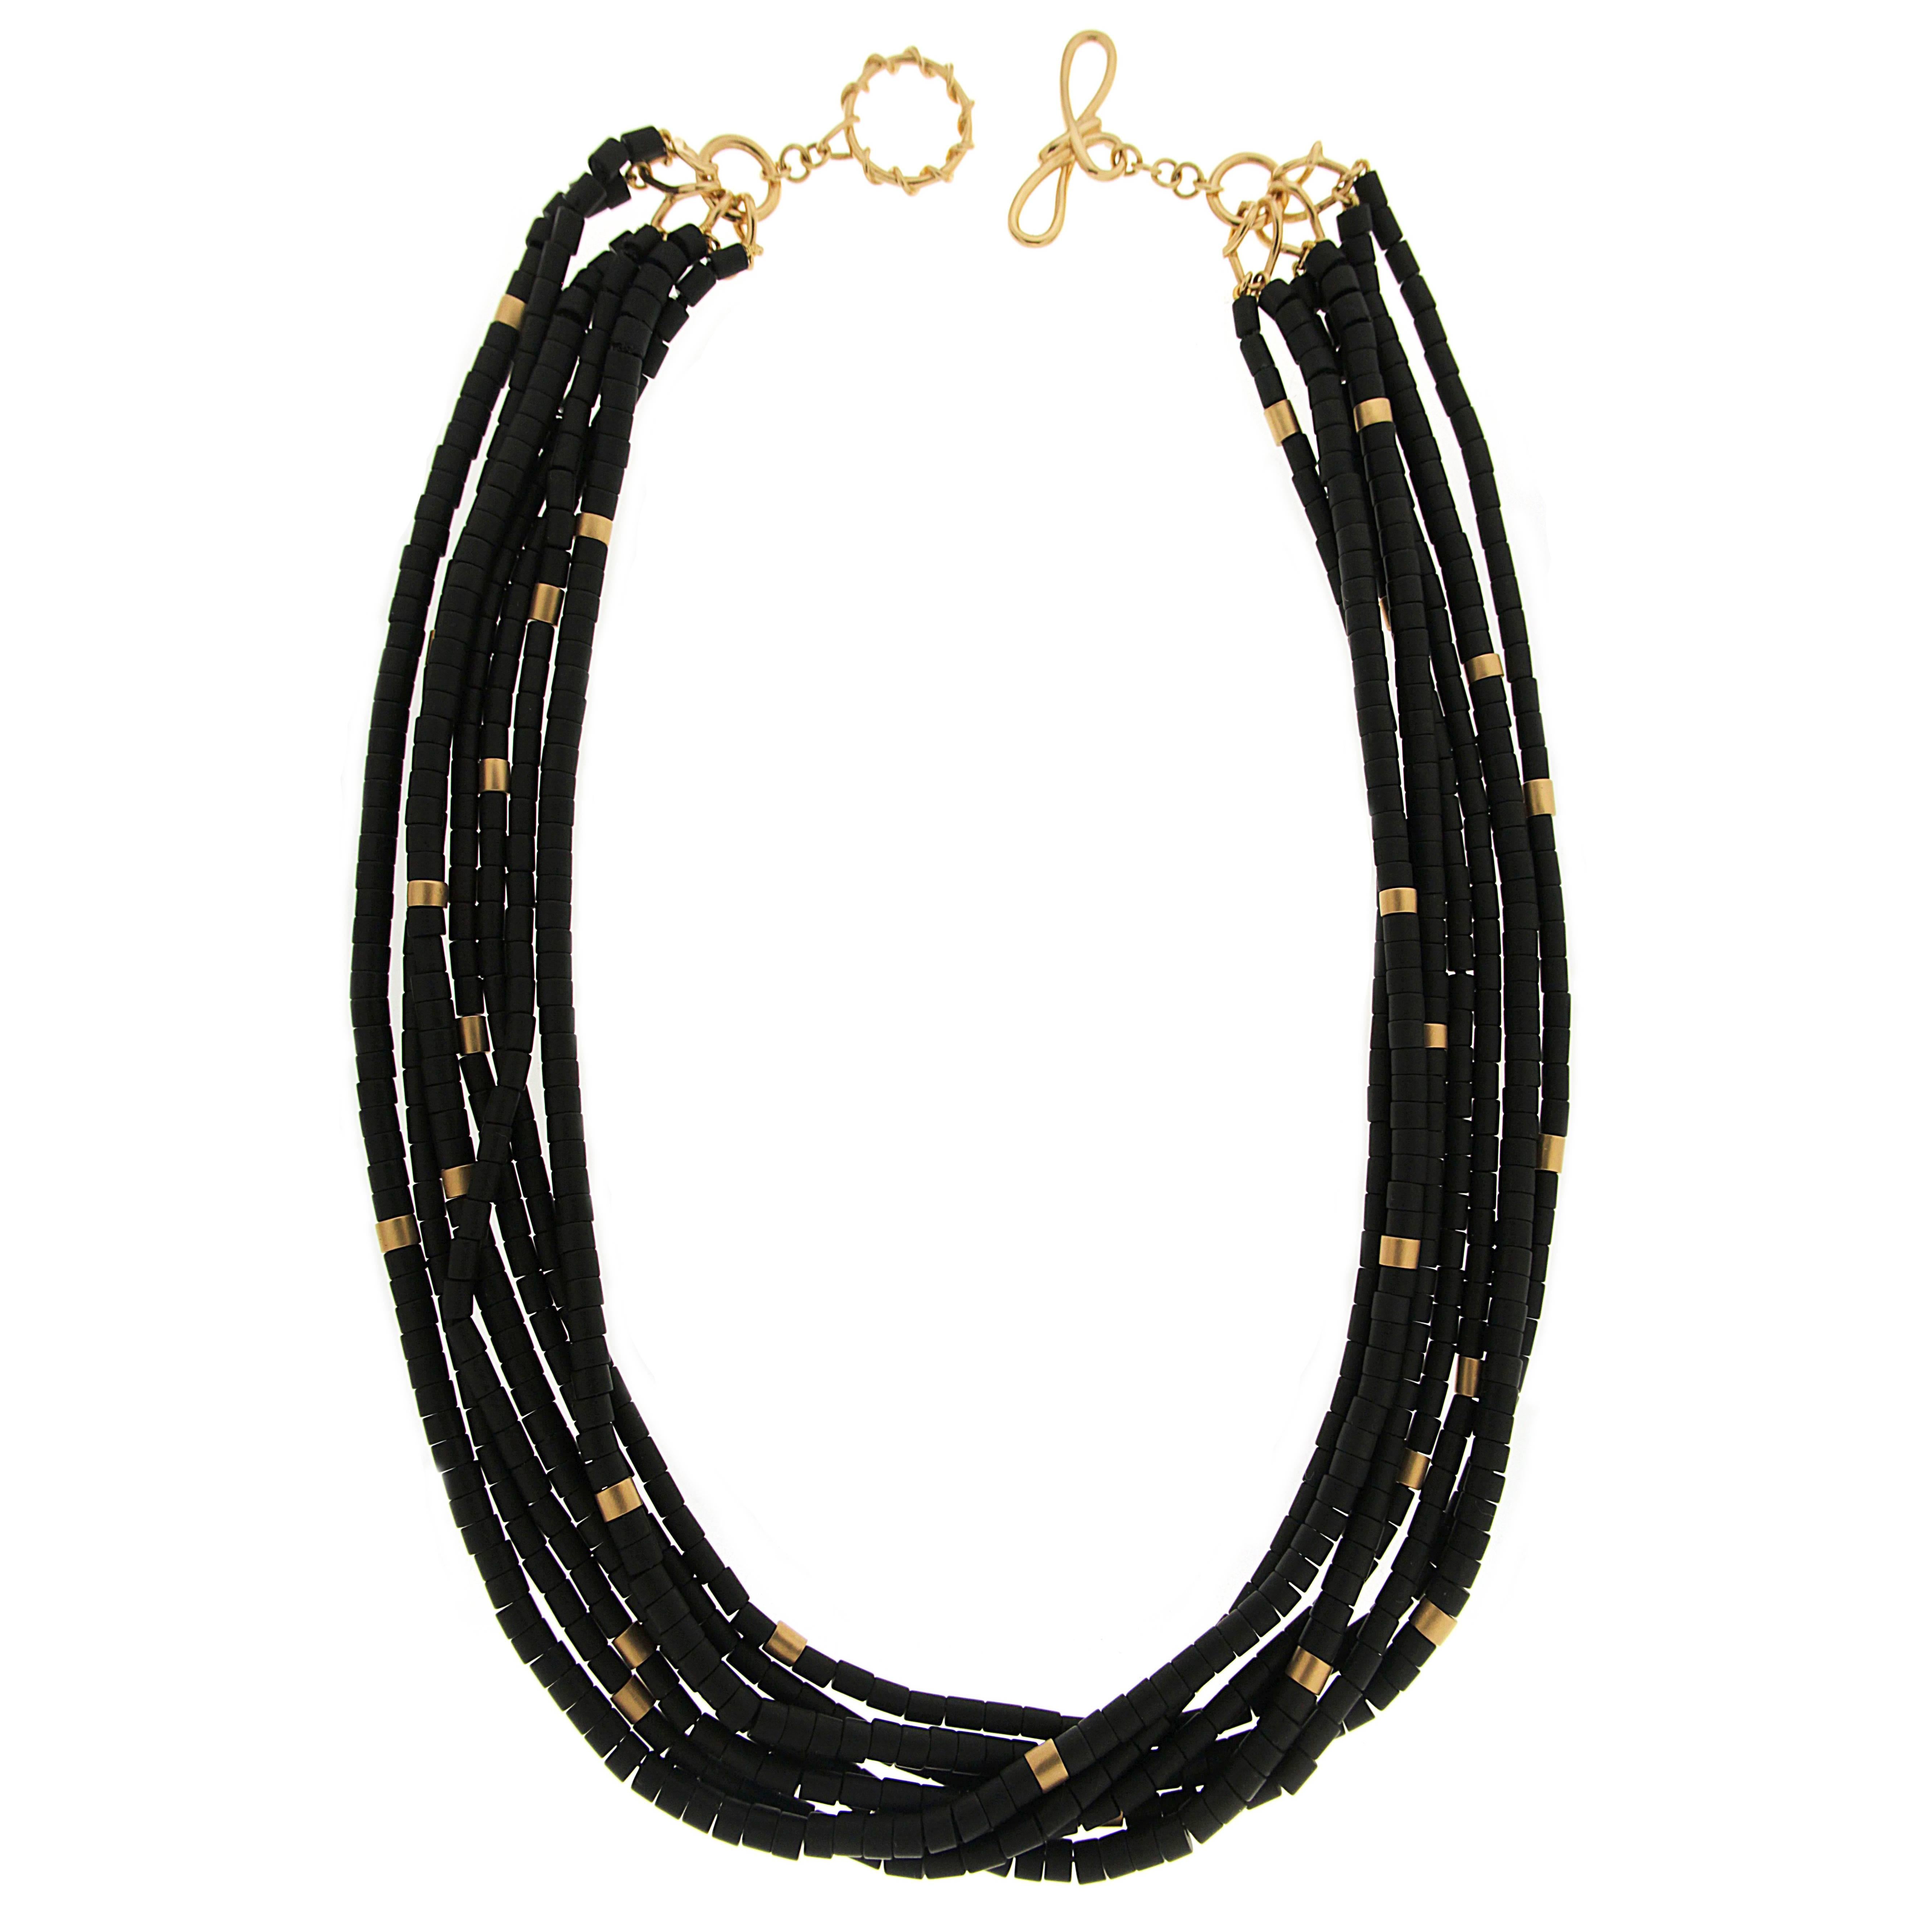 Valentin Magro Onyx Gold Tube Necklace features bright accents. The jewel of choice is onyx, carved into tubes. They are placed onto six strands, with the occasional 18k yellow gold bead for a burst of color. Every bead reflects a matte polish.